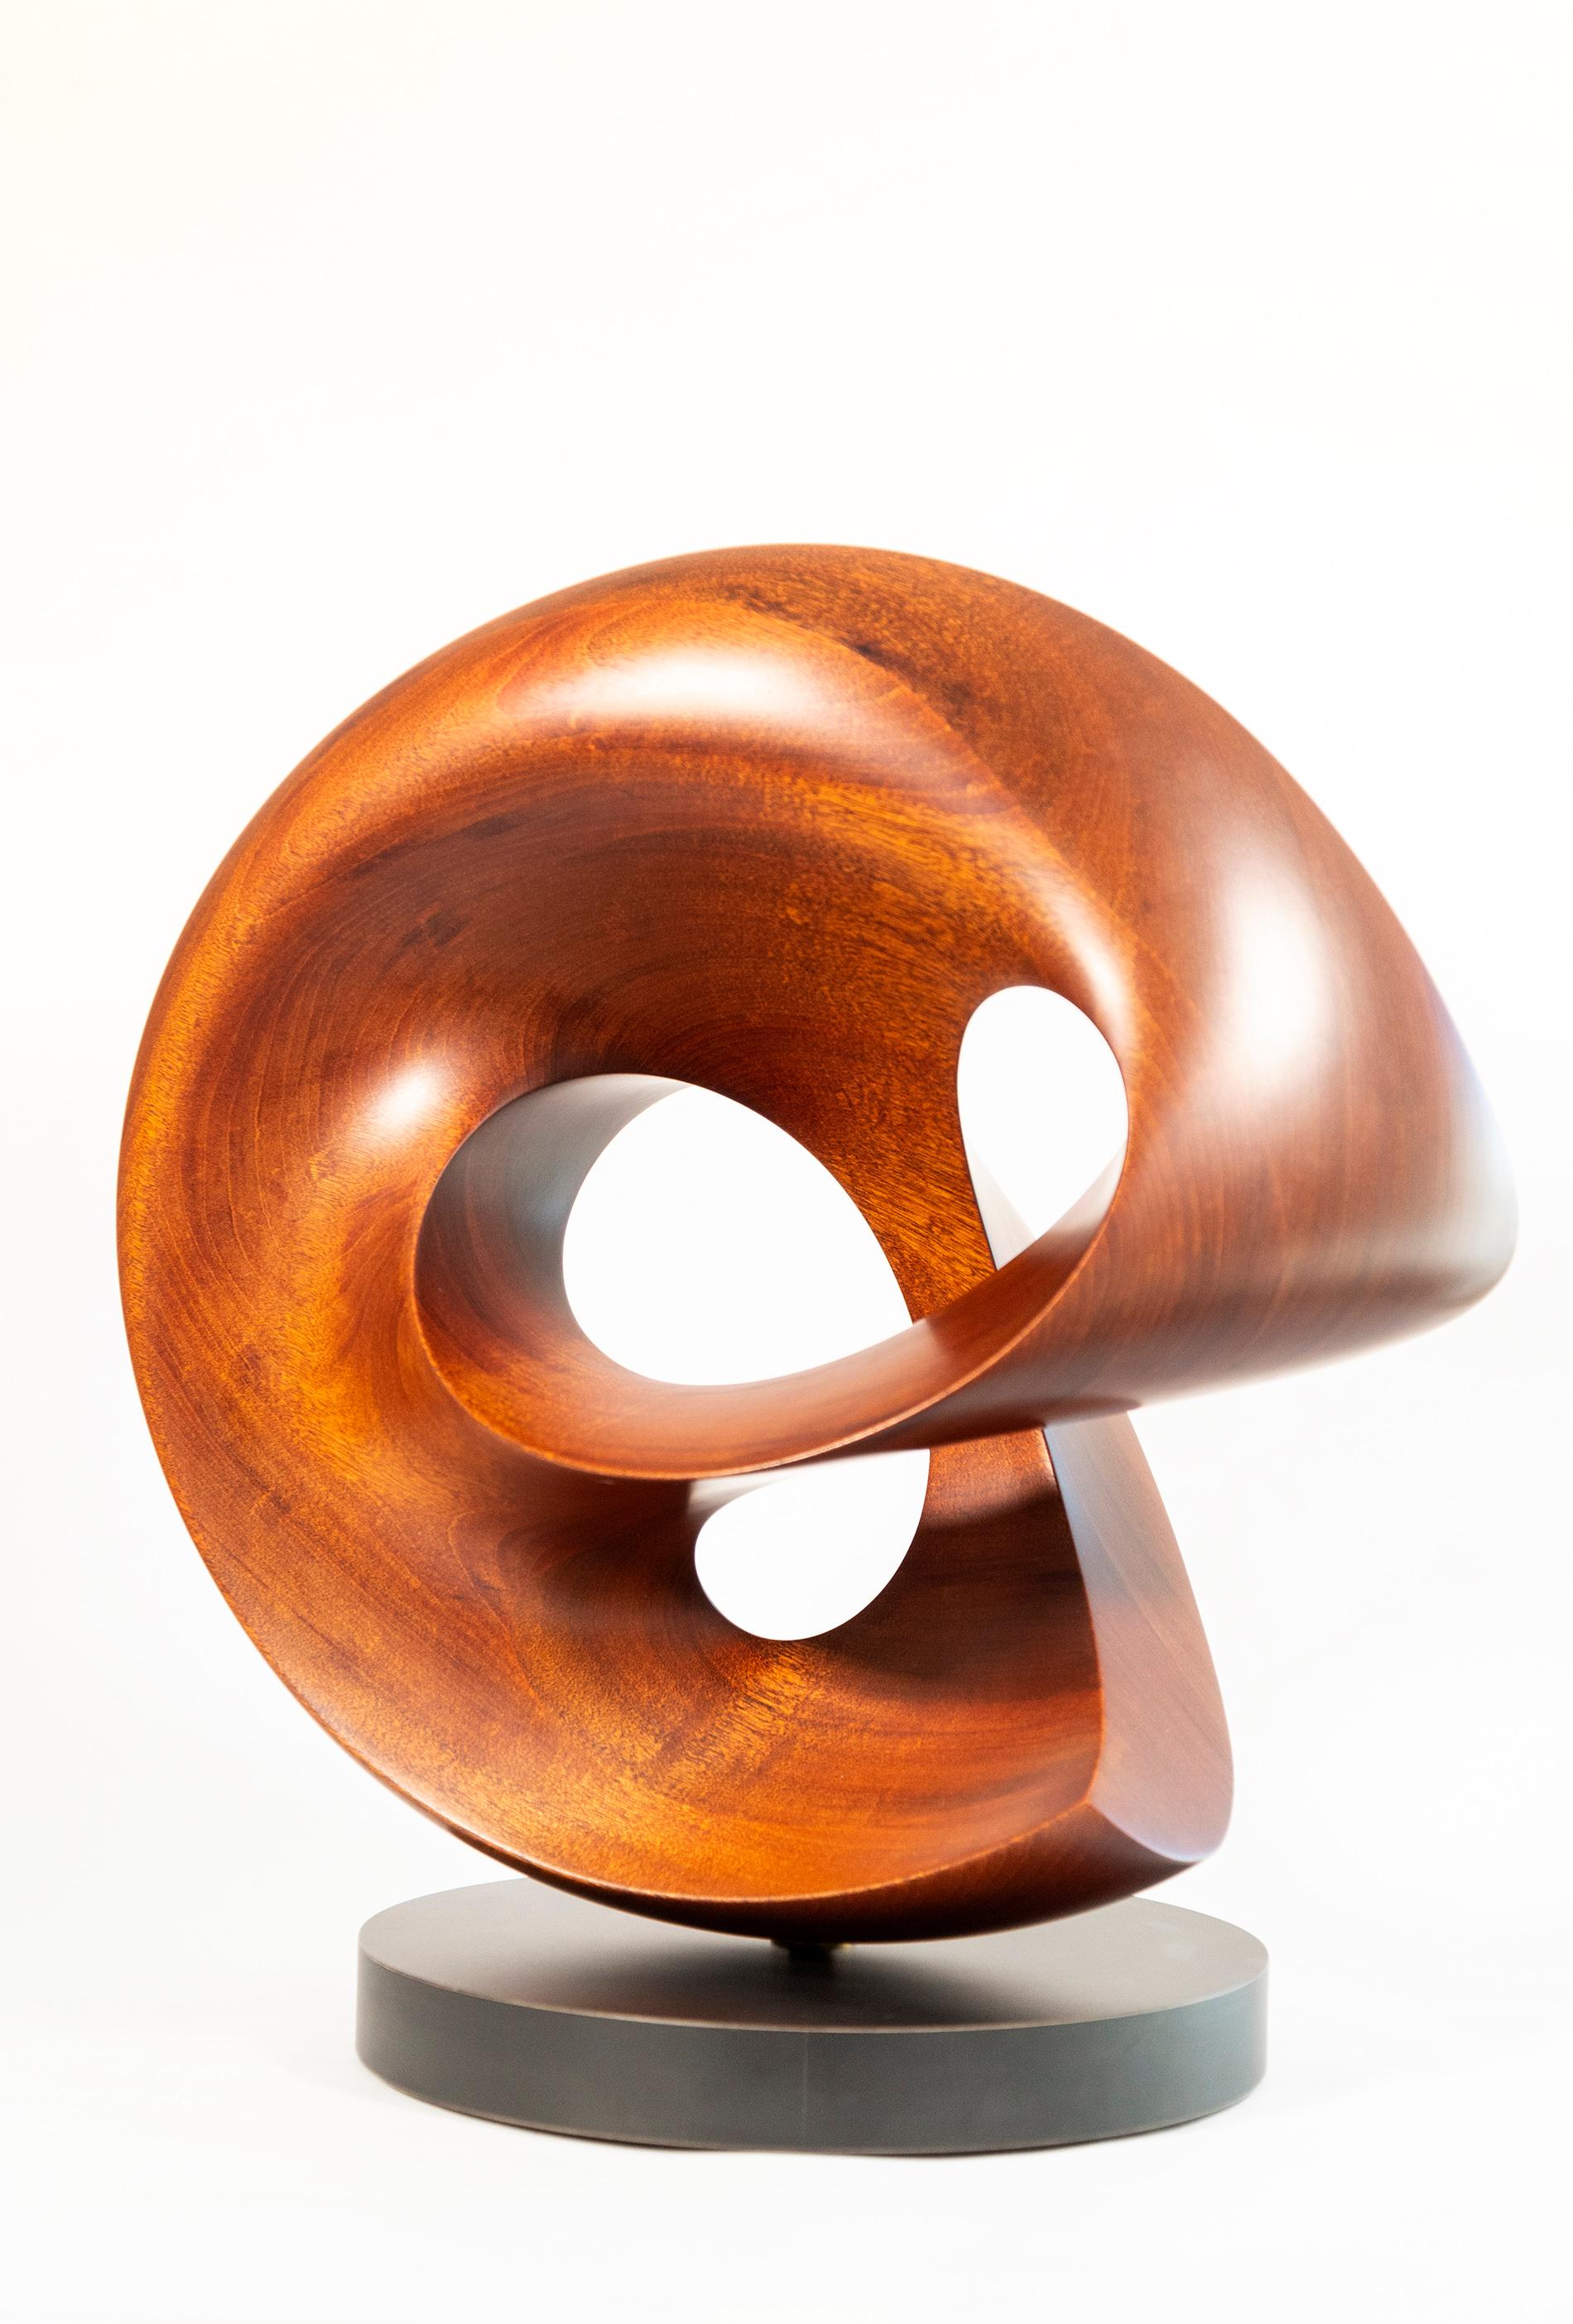 Fanfare - smooth, polished, abstract, contemporary, mahogany carved sculpture